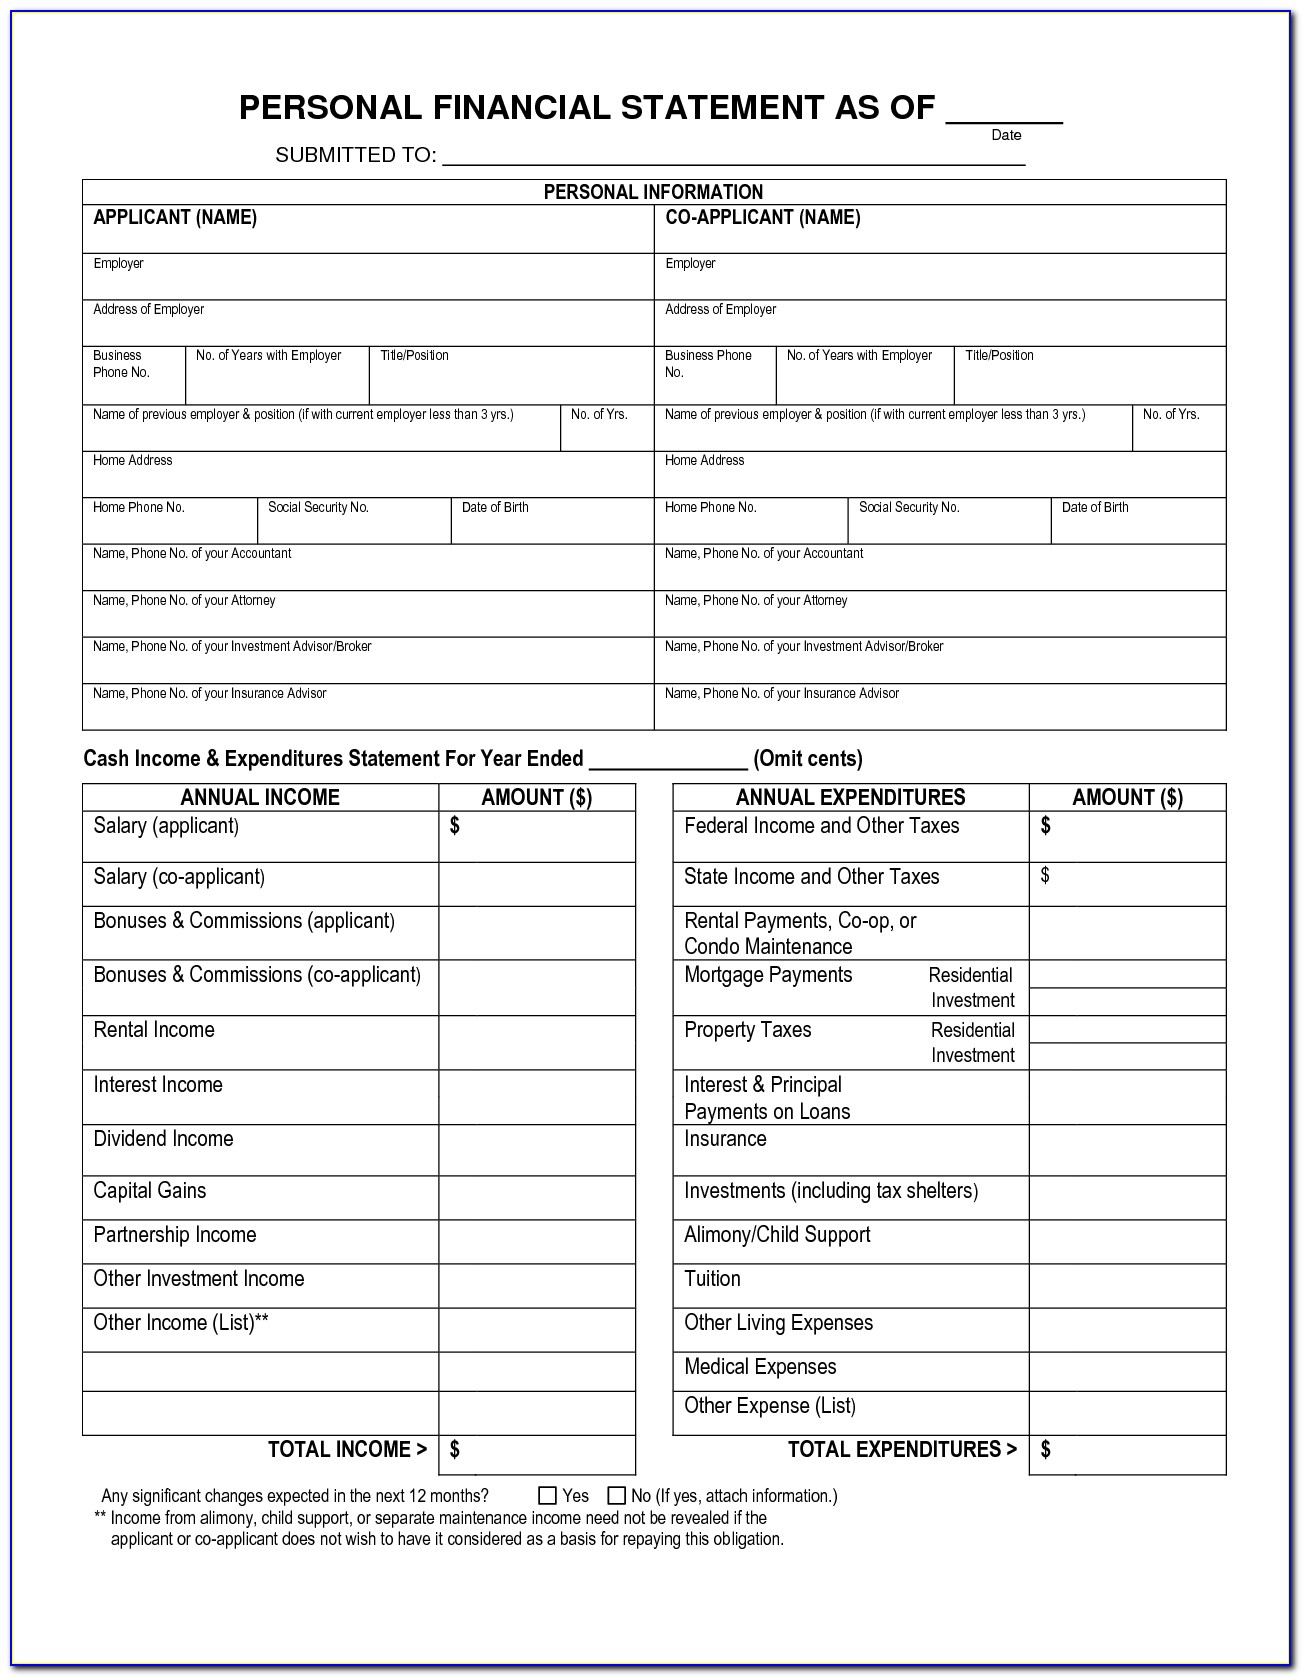 Free Blank Personal Financial Statement Form Download